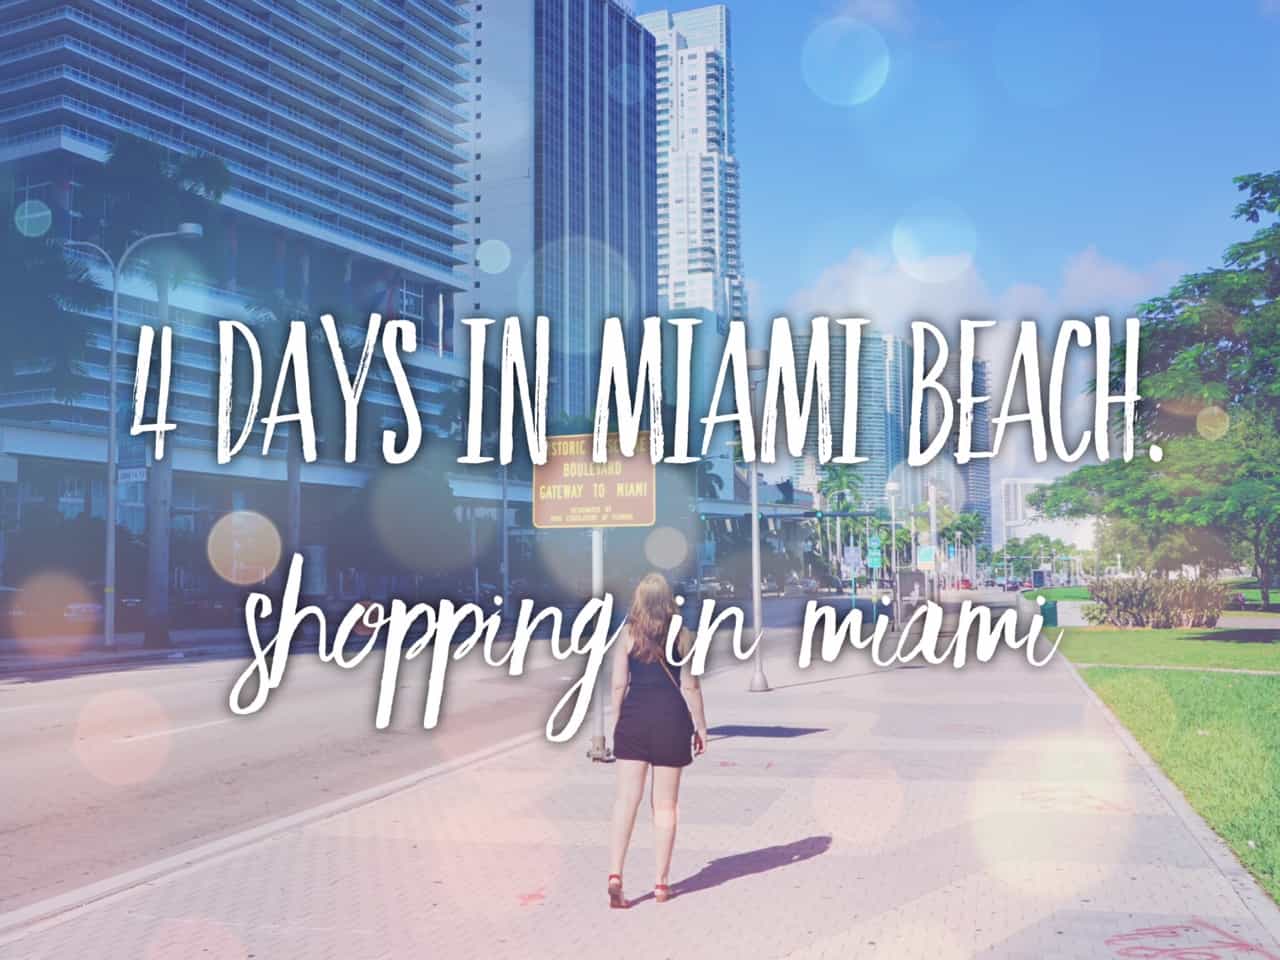 4 days in Miami Beach: things to do. Shopping in Miami: Sawgrass Mills